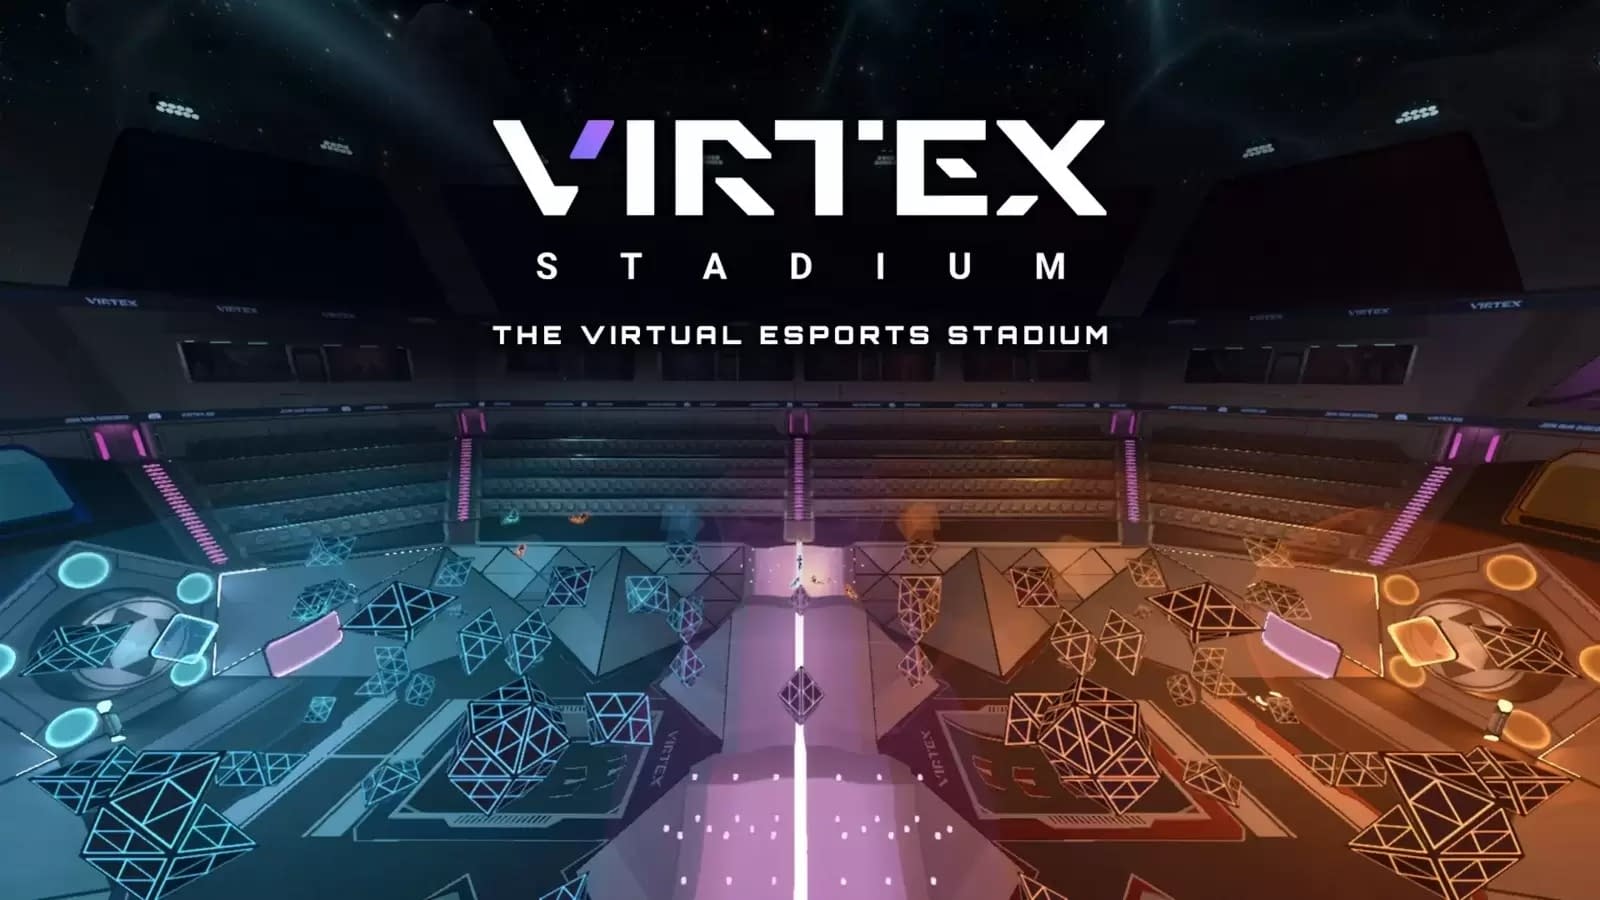 Counter Strike matches can now be watched in the virtual e-sports stadium